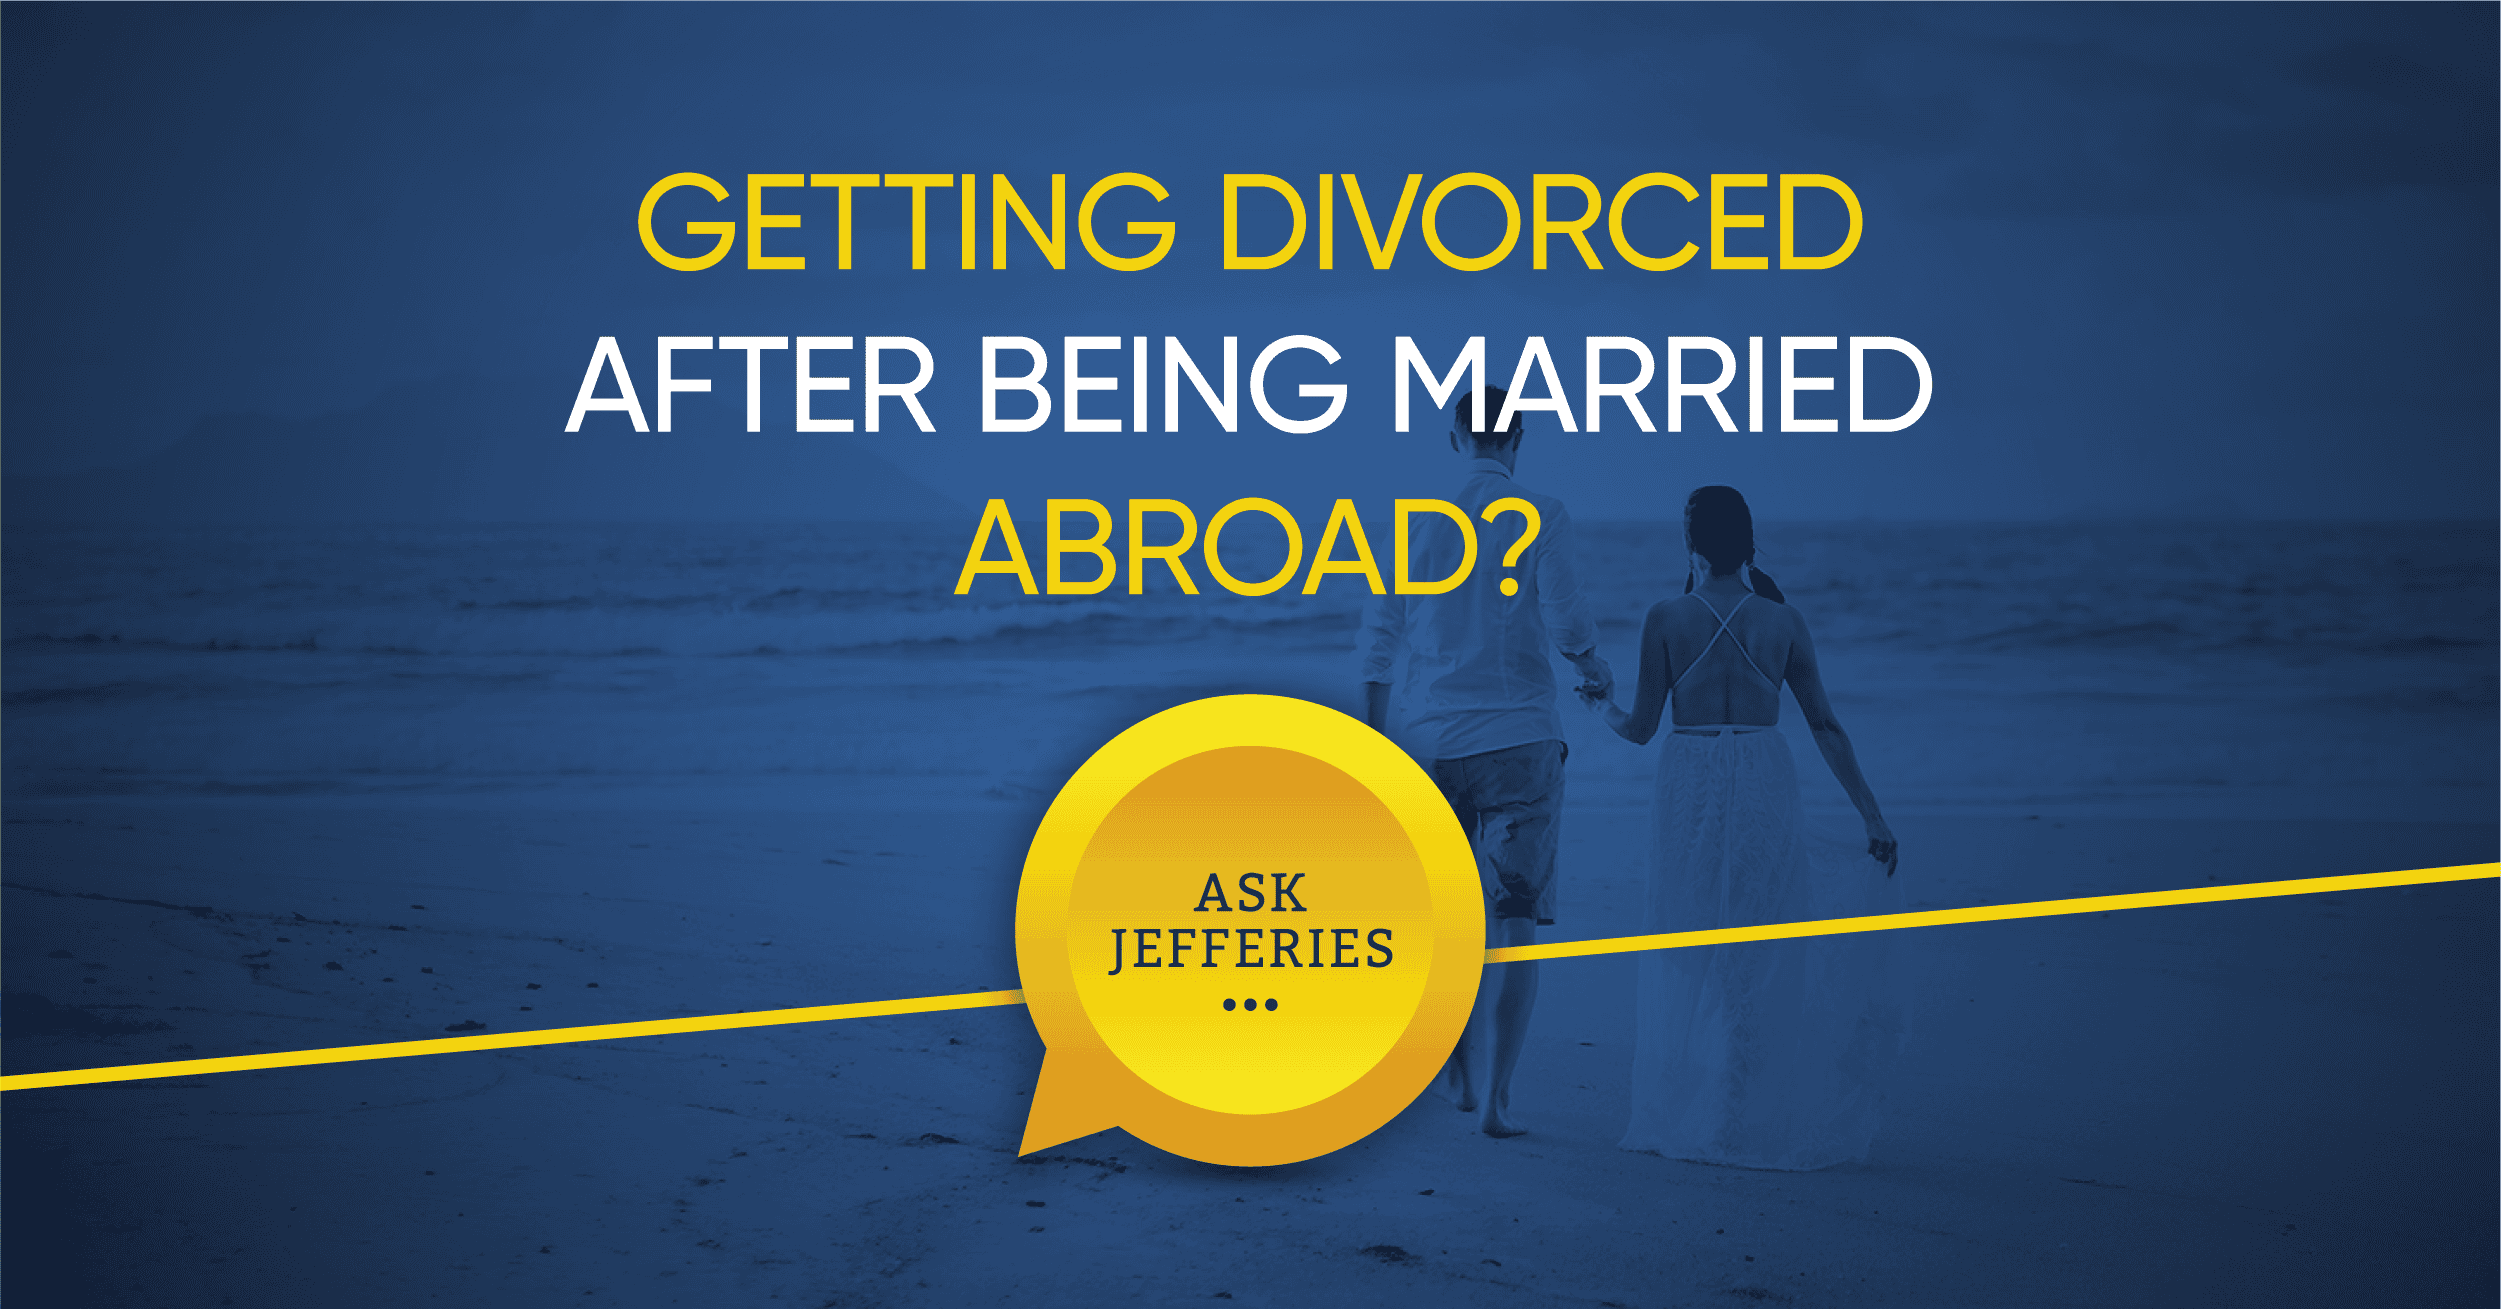 Getting divorced after being married abroad. Two people hand in hand on a beach